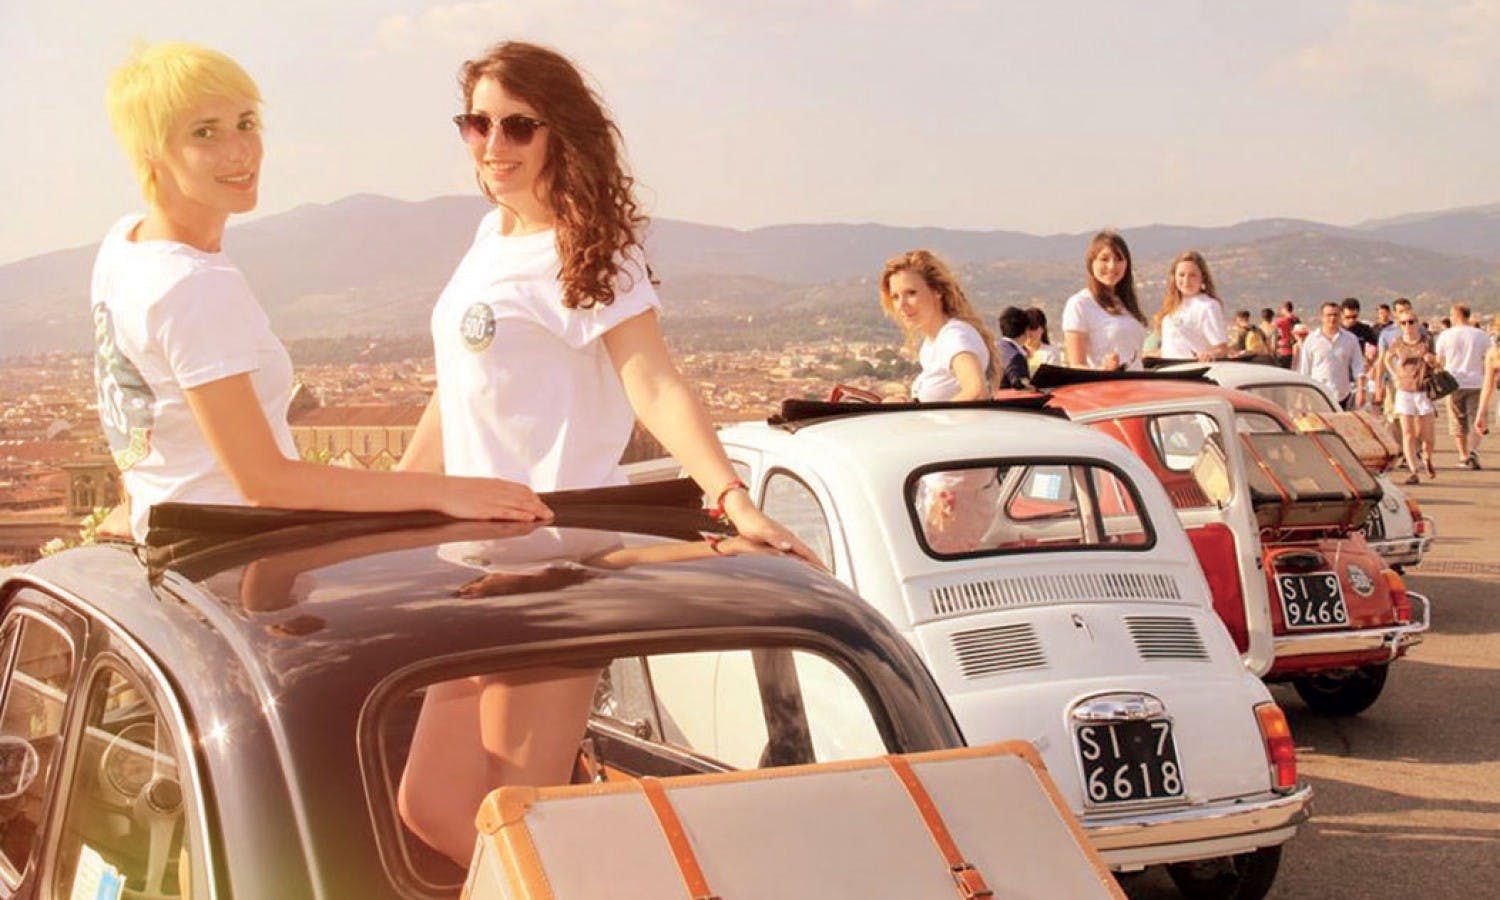 Chianti: Vintage Tour on a Fiat 500 with Lunch and Visit to a Winery